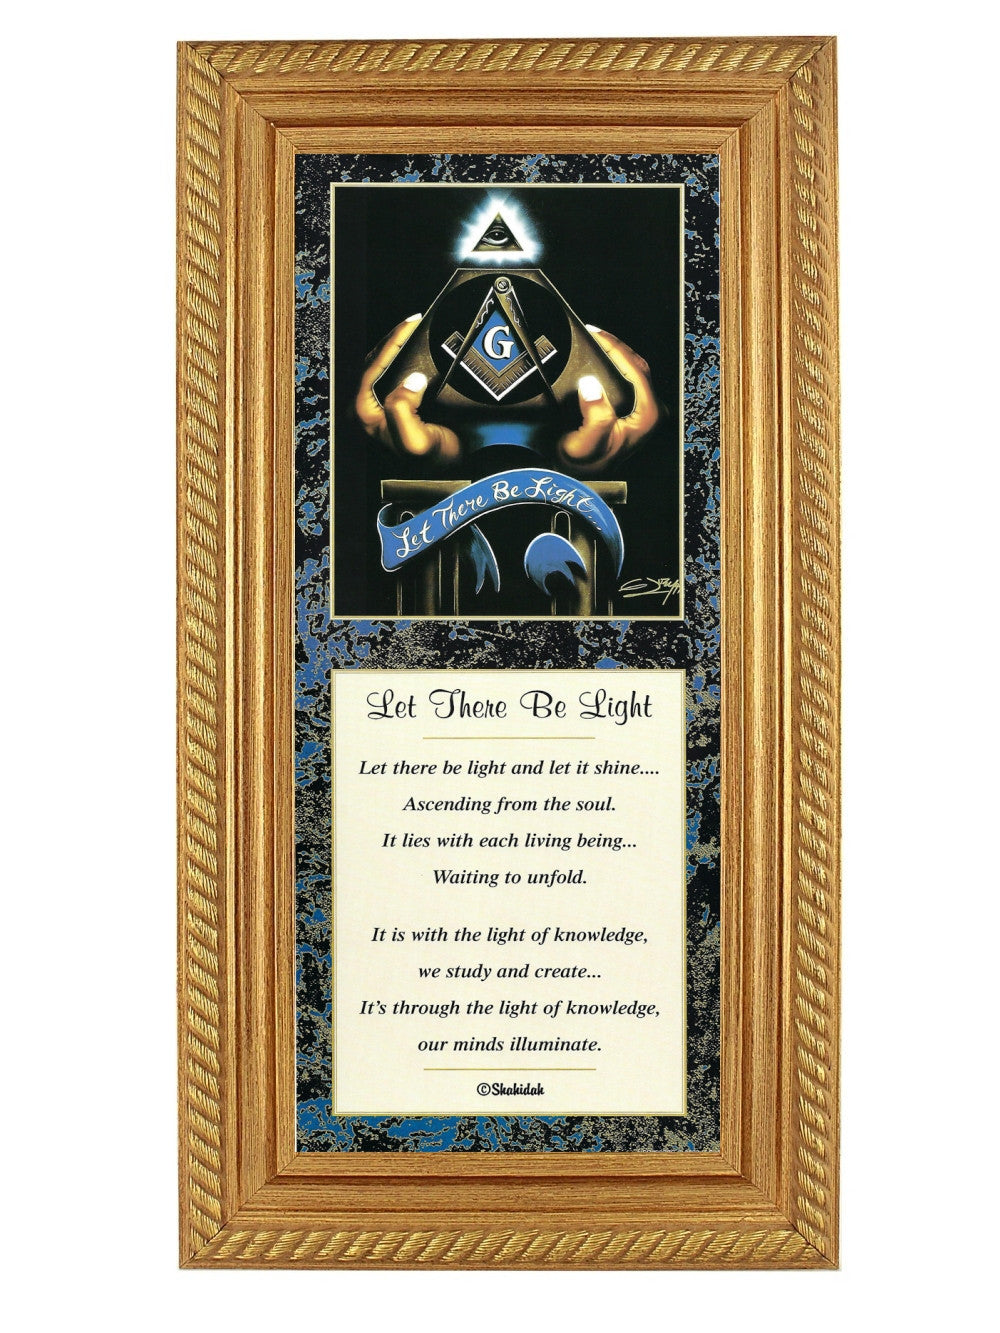 2 of 2: Let There Be Light (Freemasonry) by Gerald Ivey and Shahidah (Gold Frame)